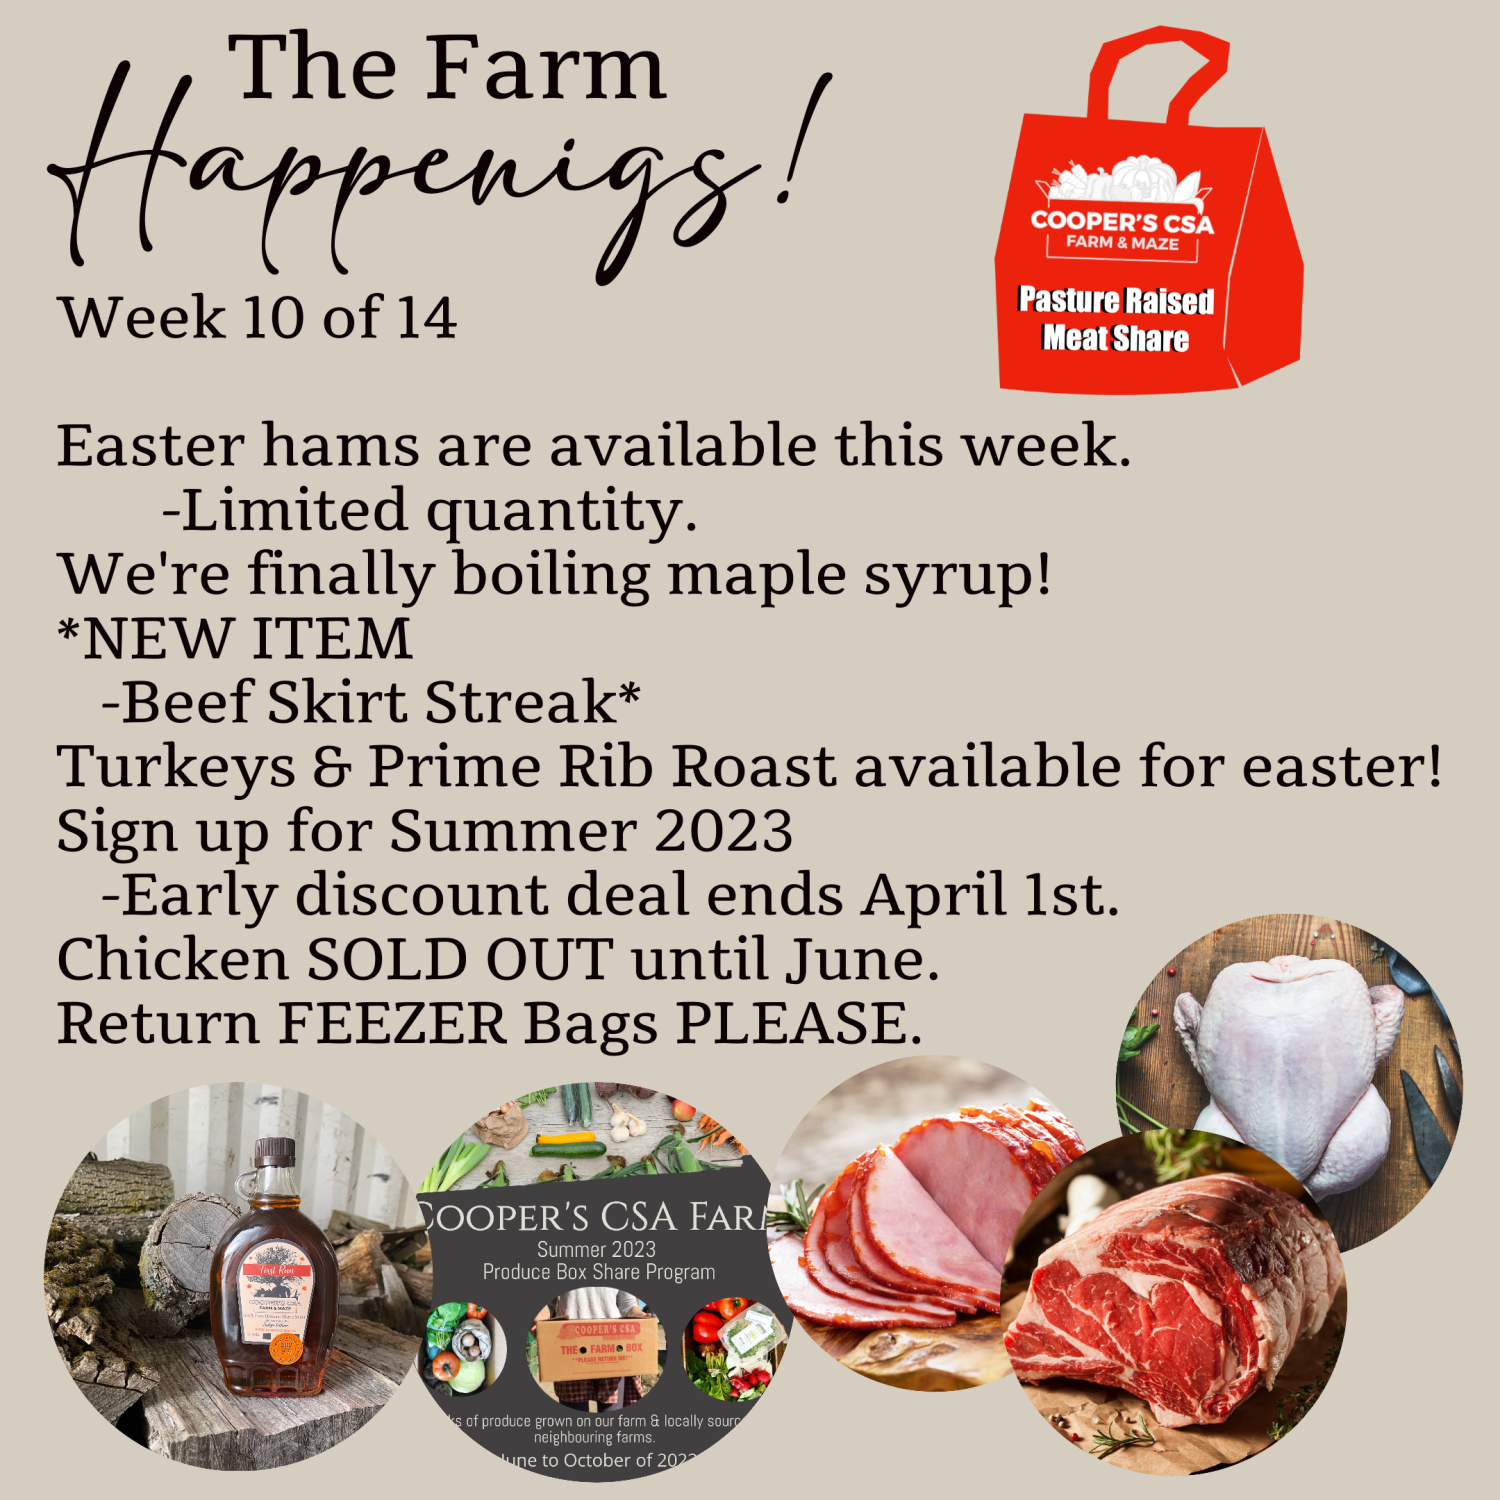 "Pasture Meat Shares"-Coopers CSA Farm Farm Happenings Week 10"